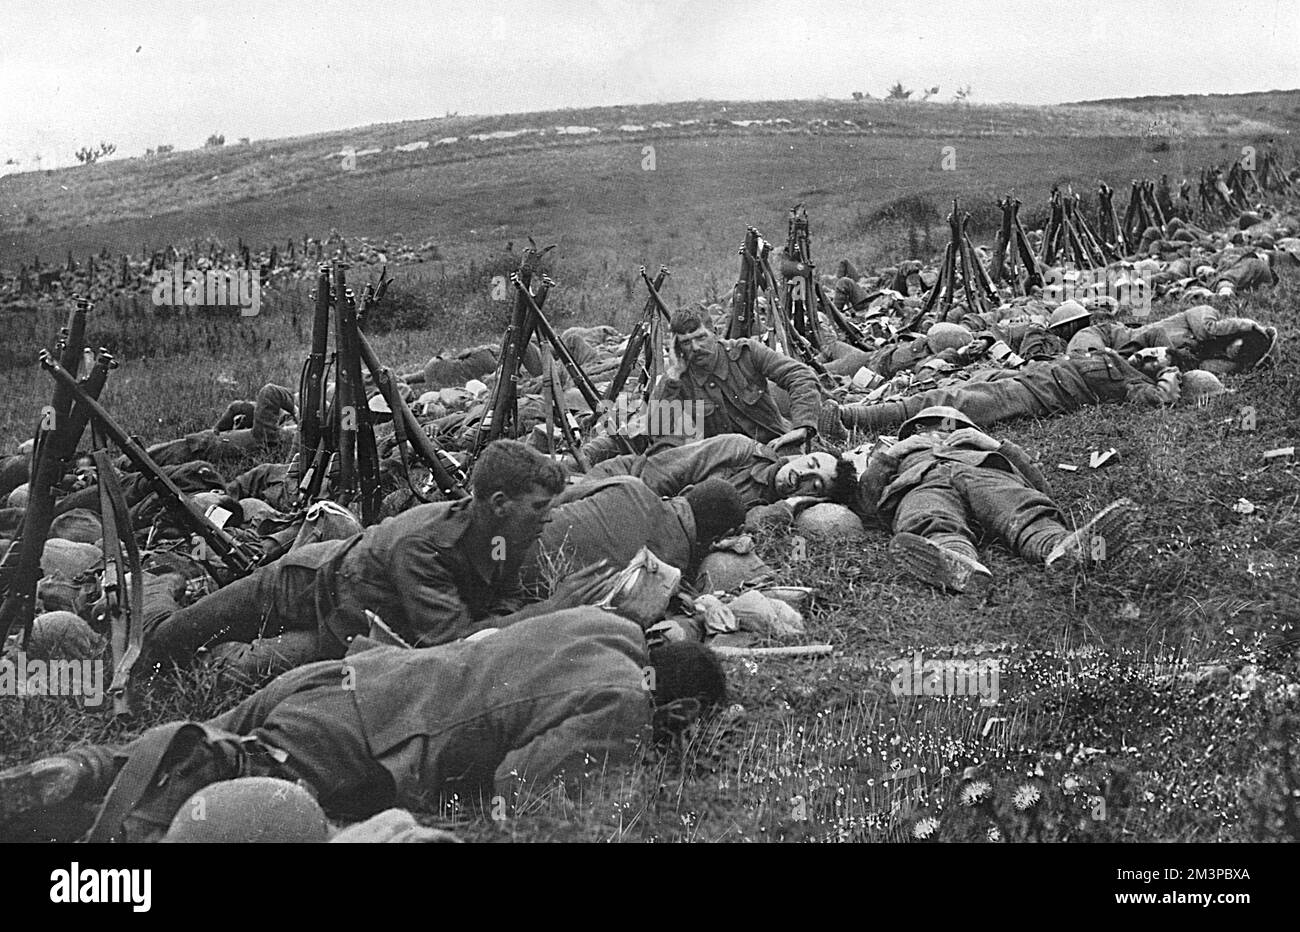 The British offensive in the Somme district of France - men of the Warwickshire Regiment bivouacked before an attack in July 1916.       Date: 1916 Stock Photo